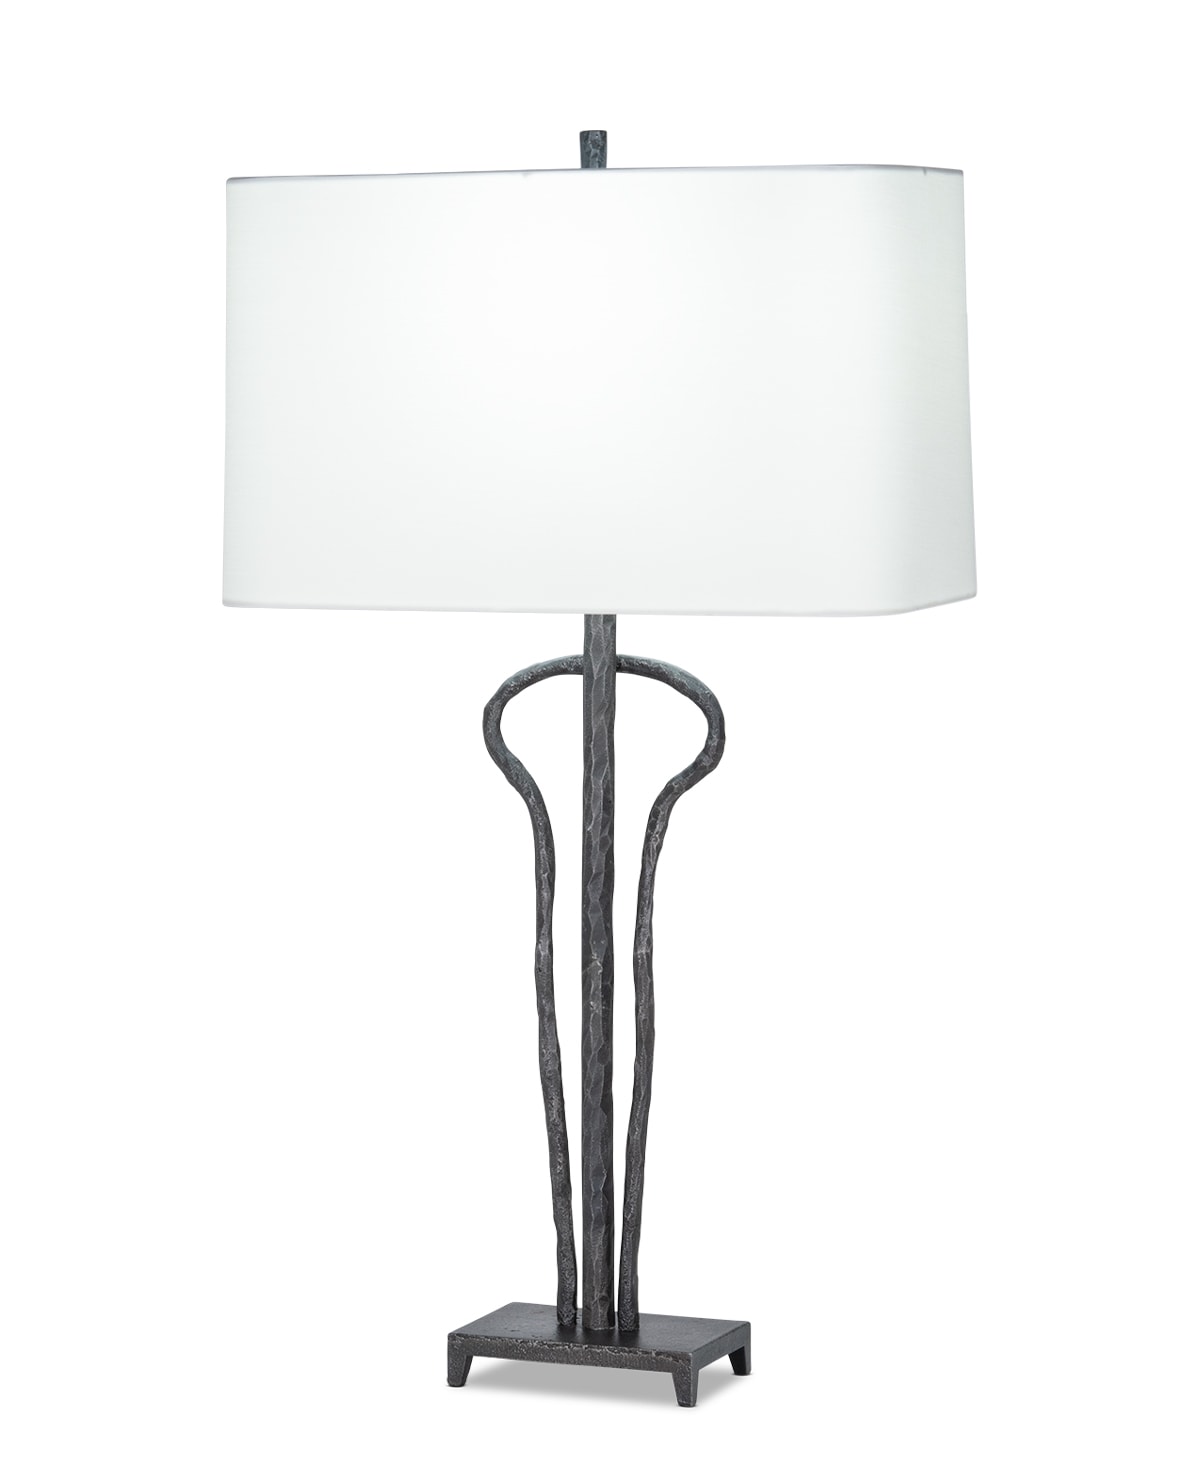 FlowDecor Dominic Table Lamp in metal with antique black finish and off-white cotton rounded rectangle shade (# 4495)